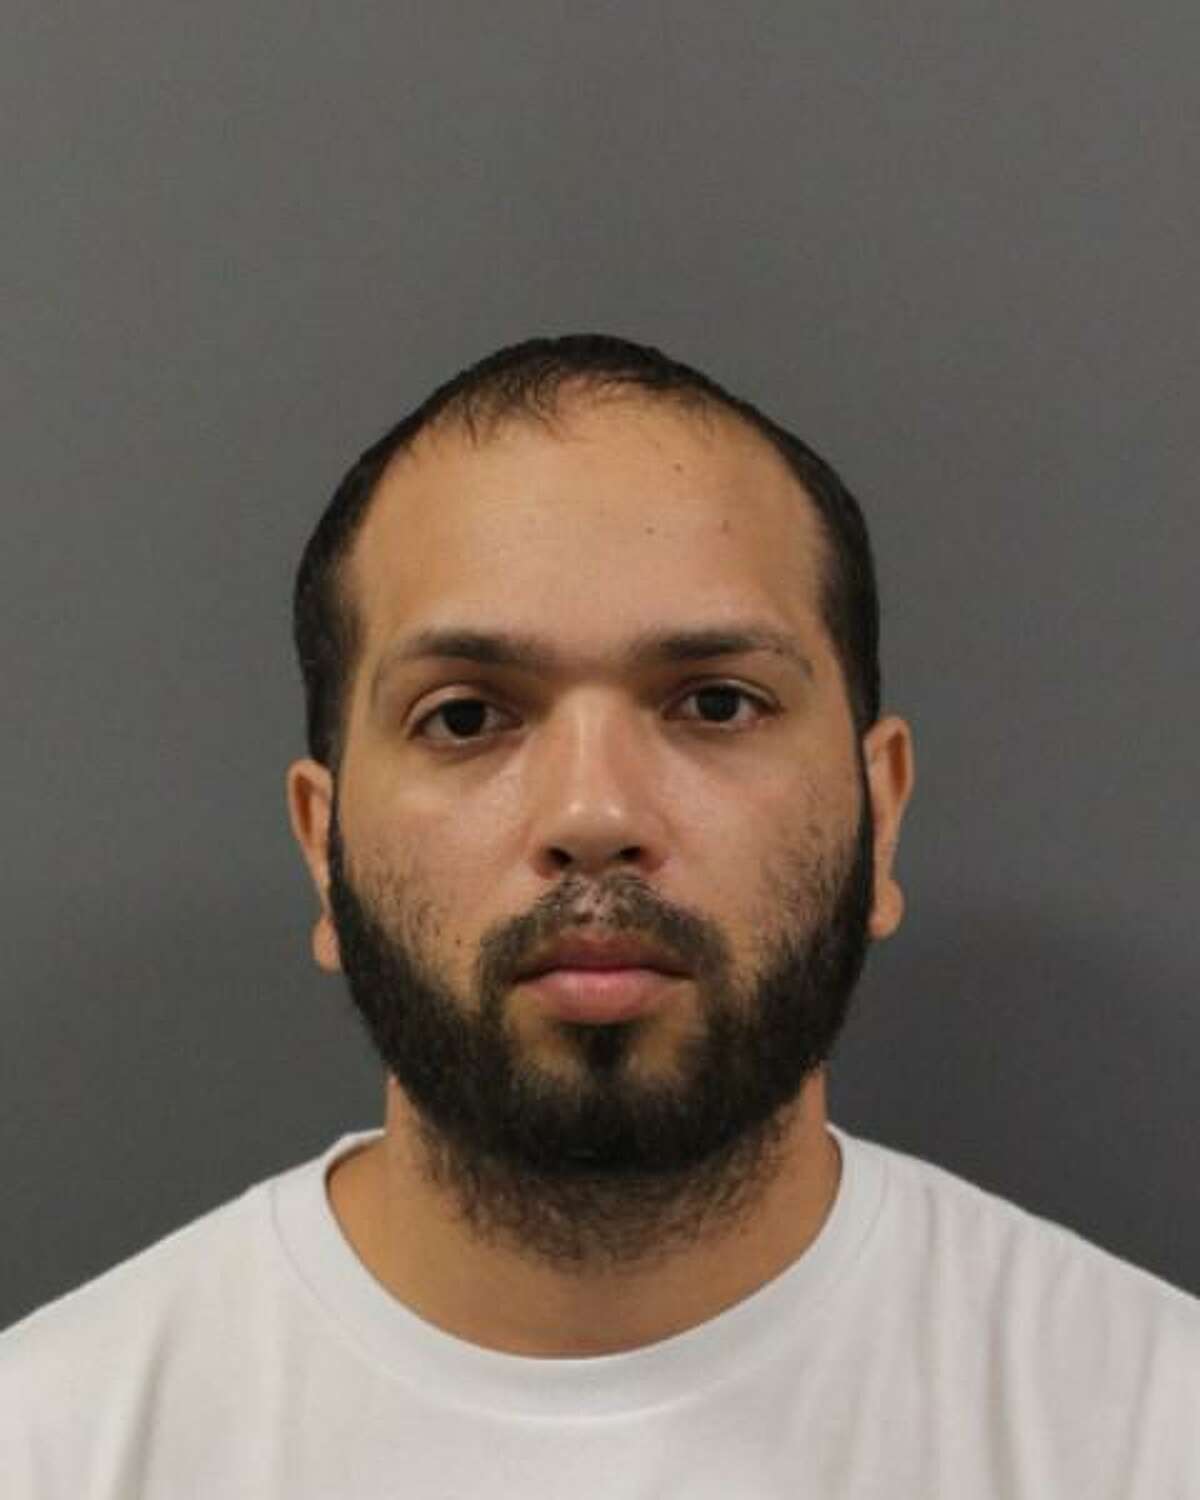 Jesus Manuel Figueroa, 32, of Hartford, was charged with four counts of first-degree sexual assault, three counts of fourth-degree sexual assault, third-degree strangulation and seven counts of risk of injury to/impairing morals of a minor, according to police Wednesday.